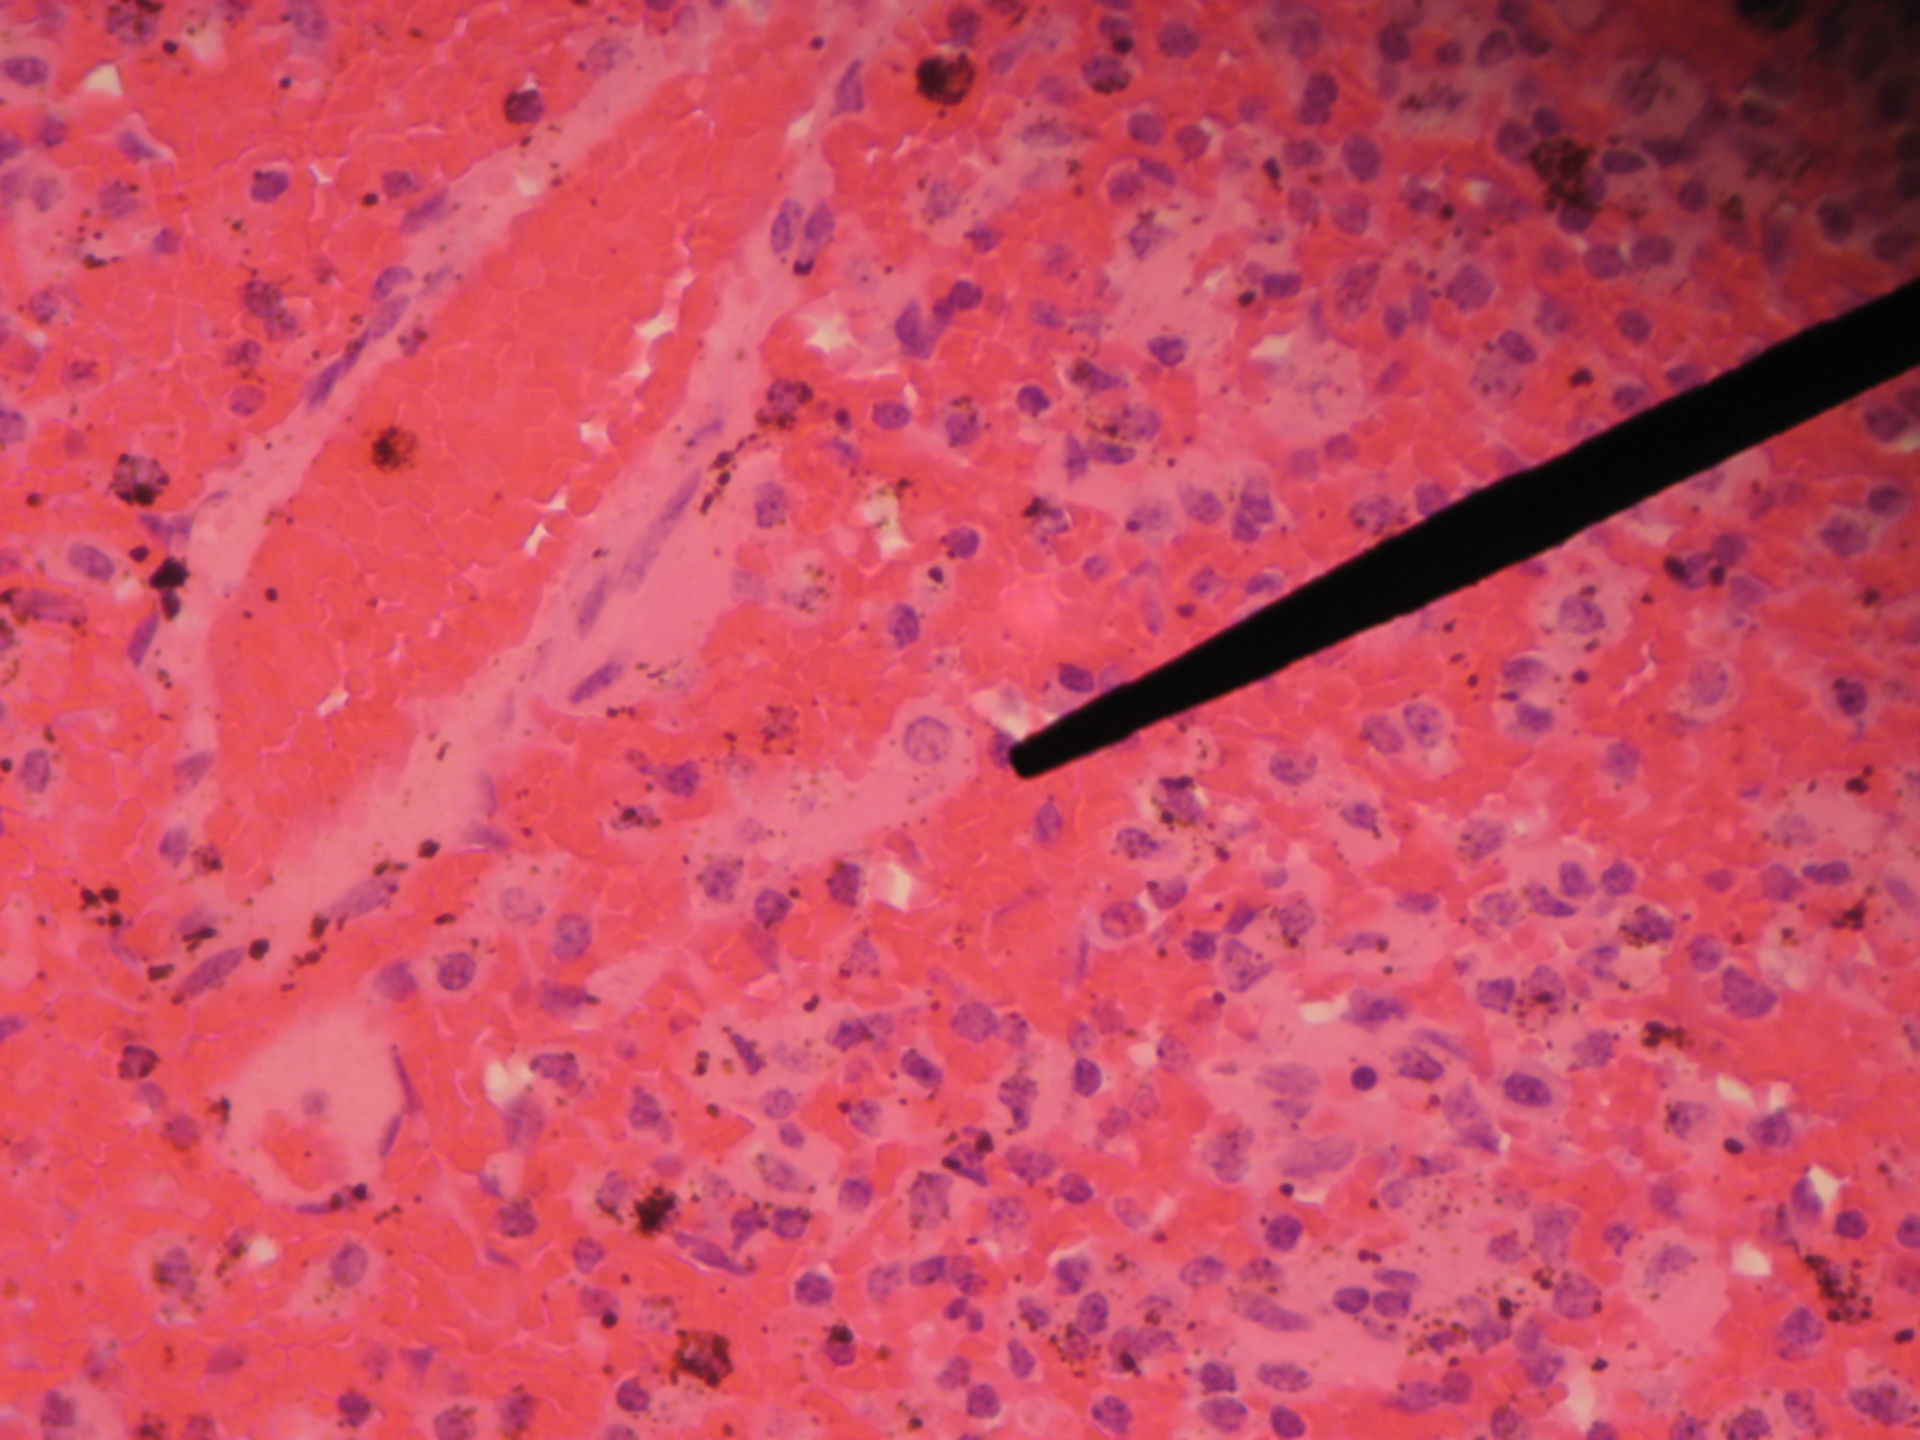 Spleen of a pig - red pulp, mcrophages, capillaries